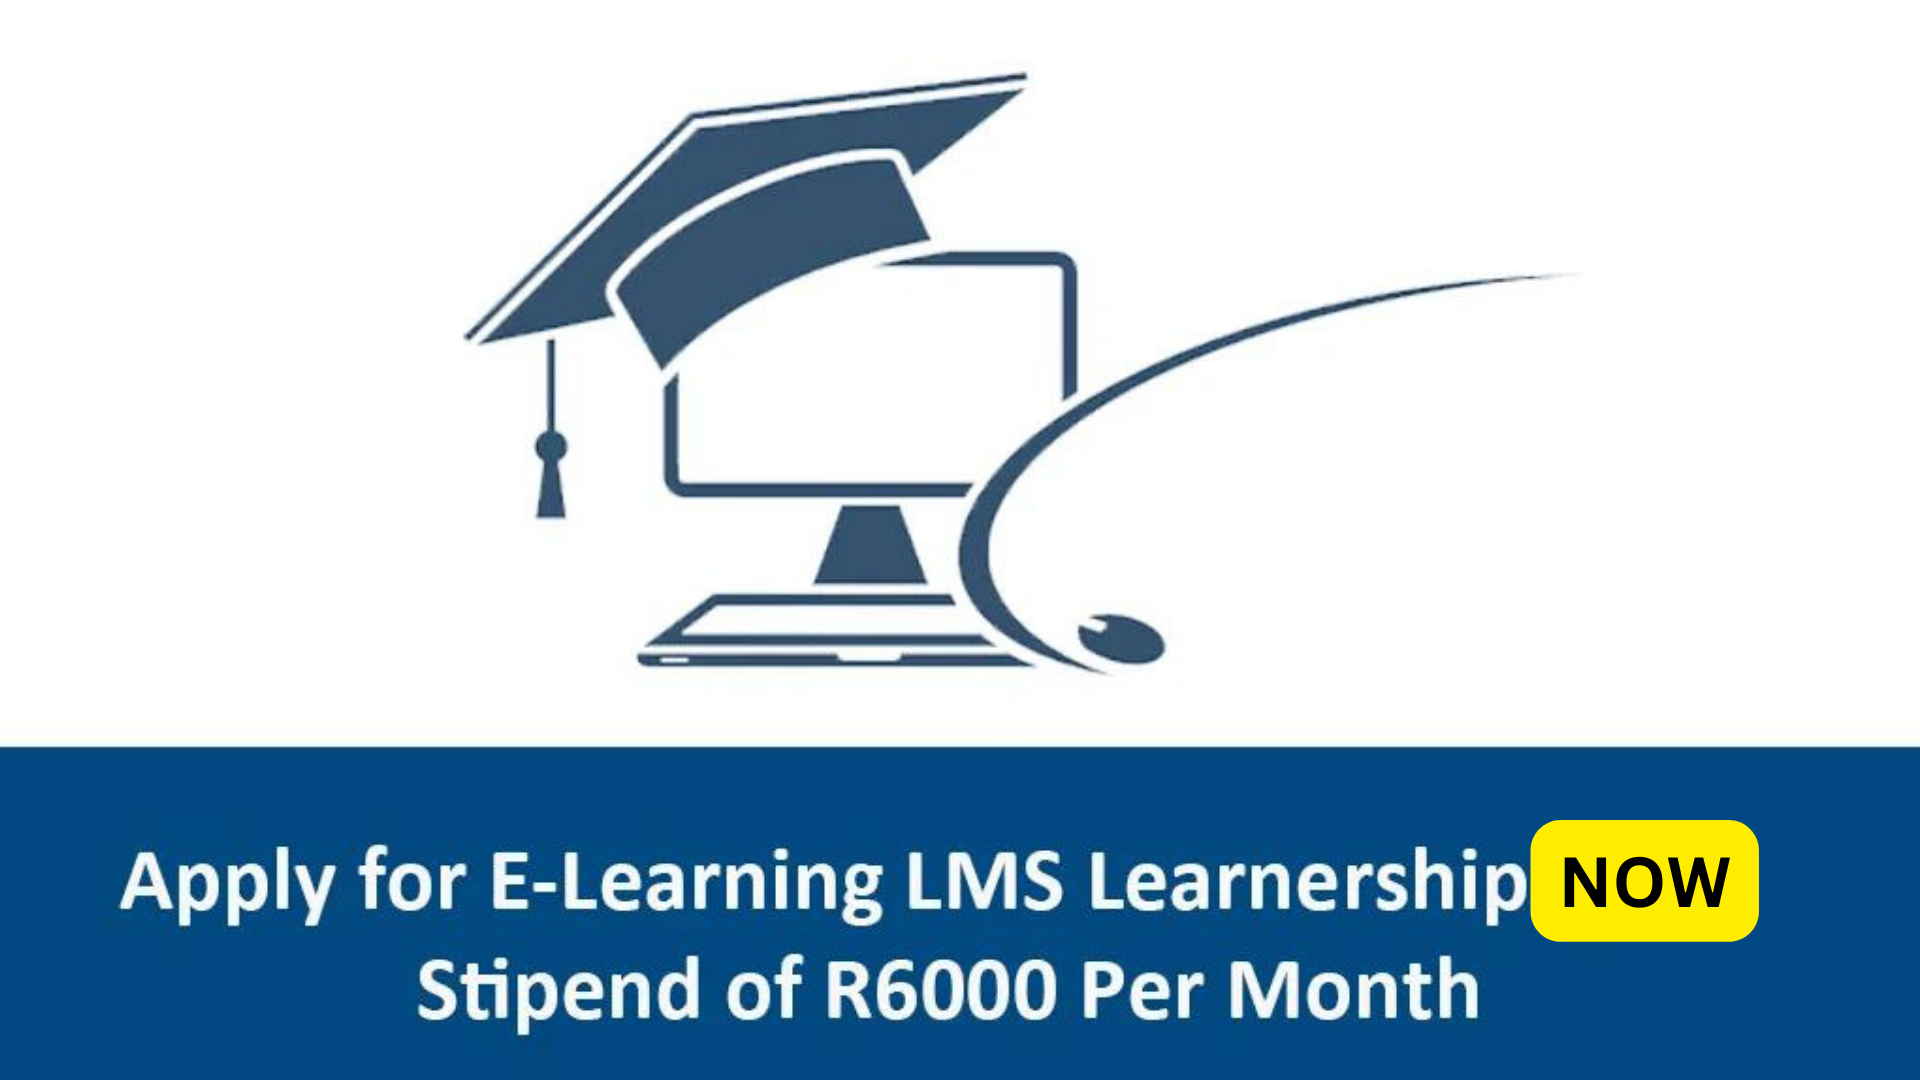 Apply for E-Learning LMS Learnership